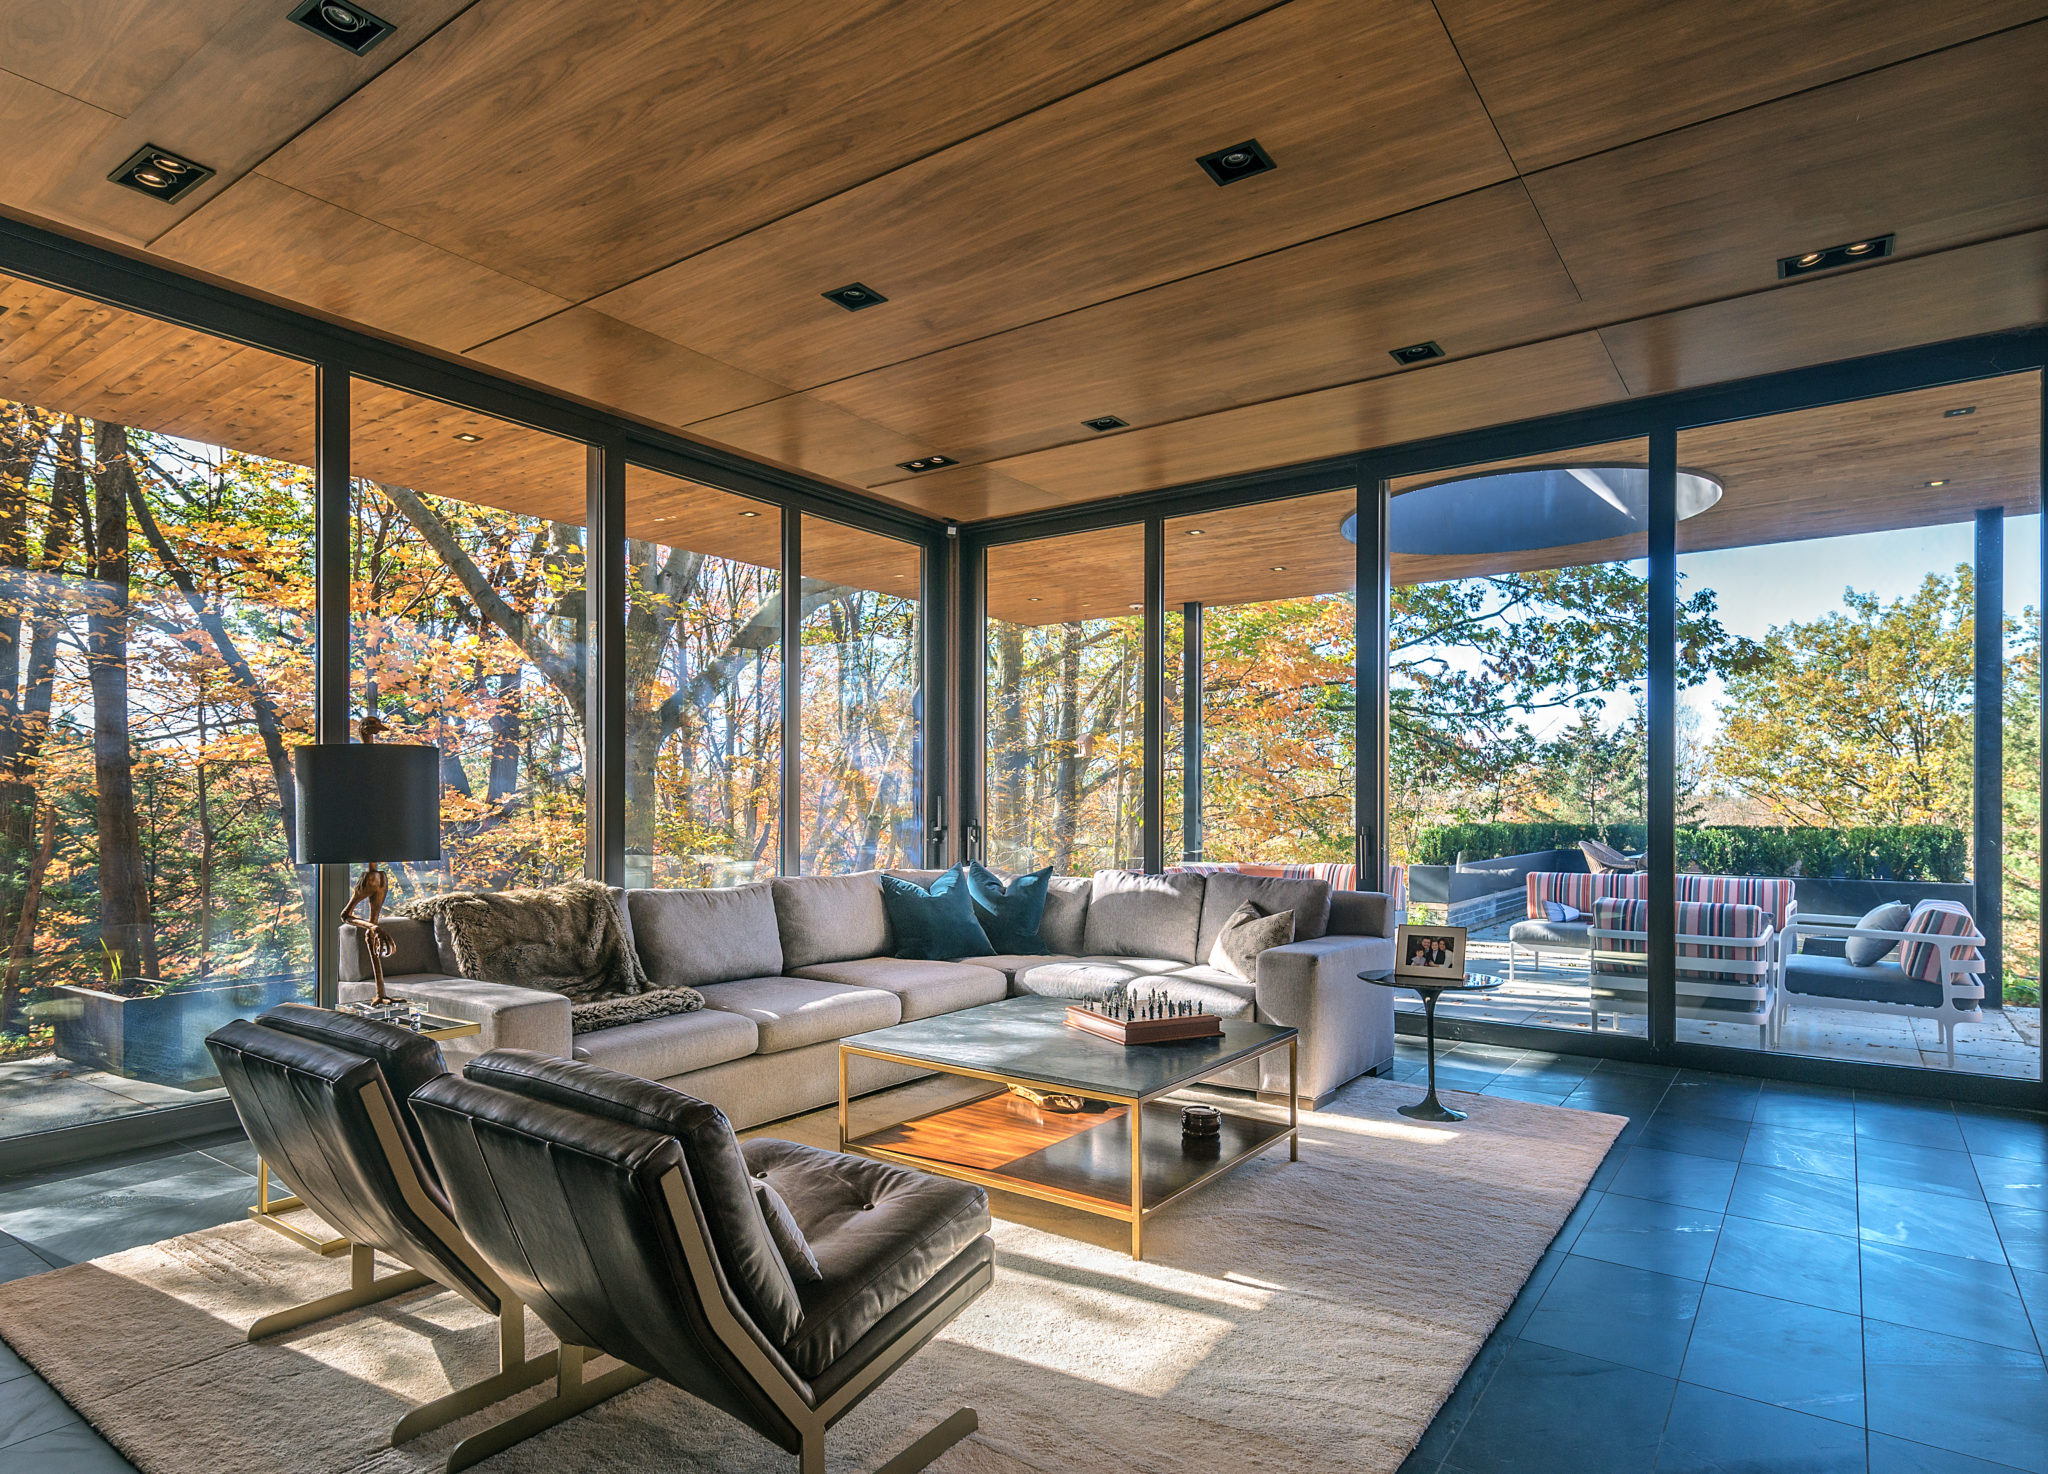 The interior of a beautifully bright indoor living space with floor to ceiling windows renovated by Frankfranco Architects on their Woodland Ridge custom home renovation project.